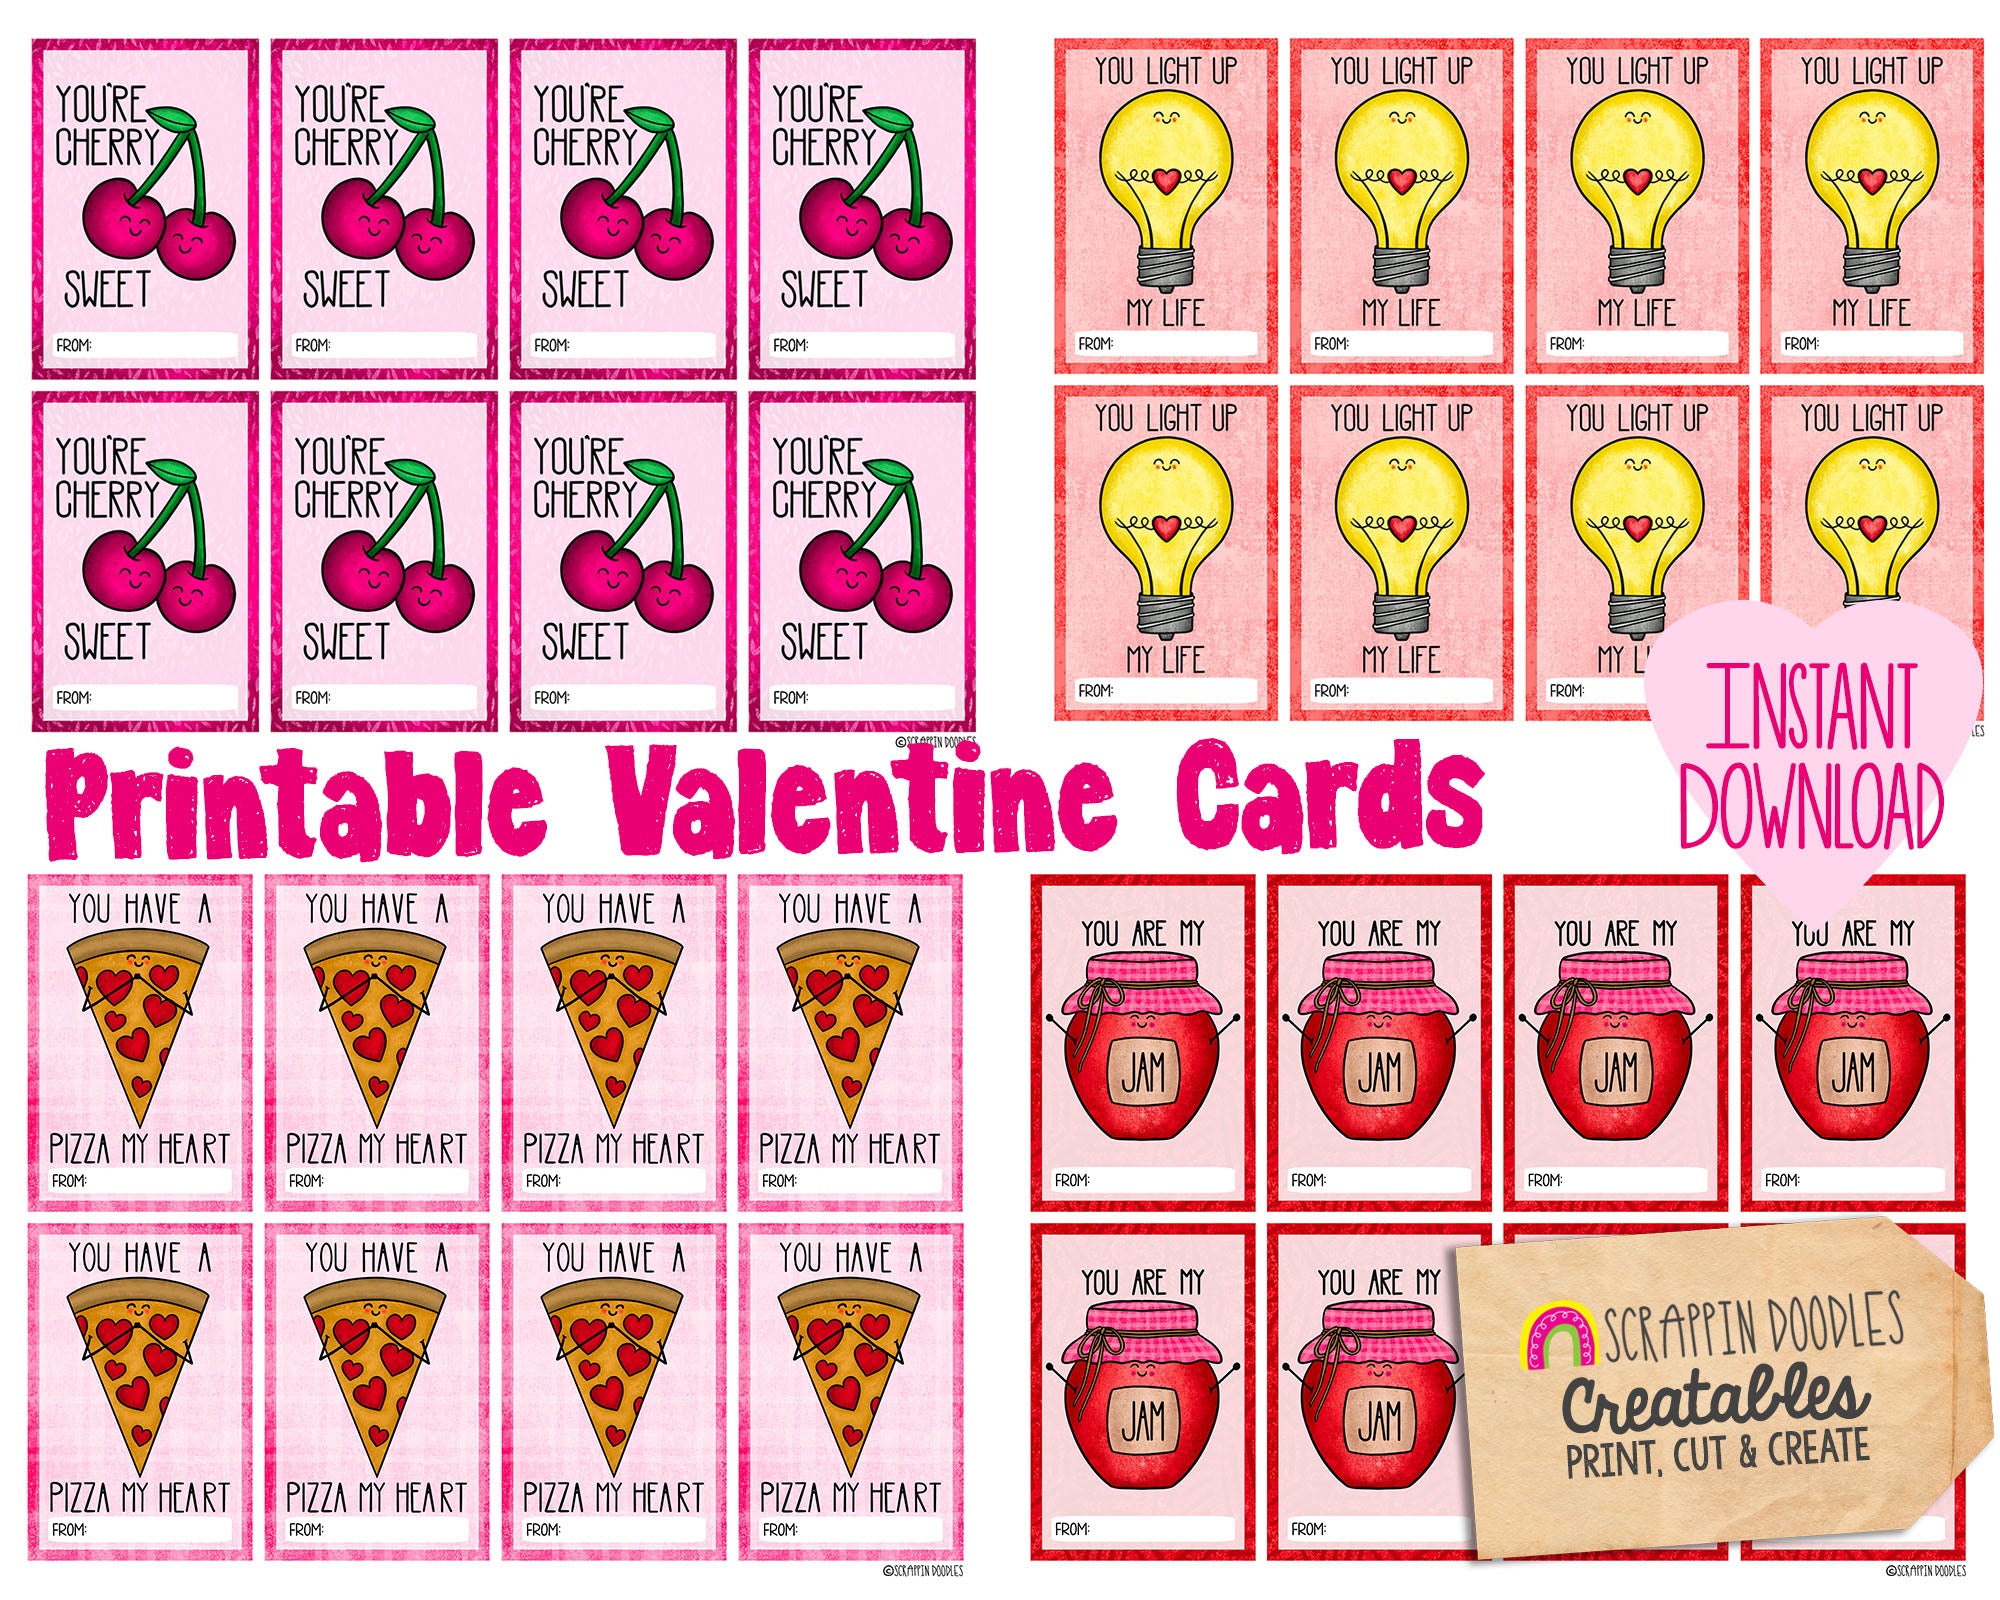 Printable Valentine's Day Digital Papers for Crafts